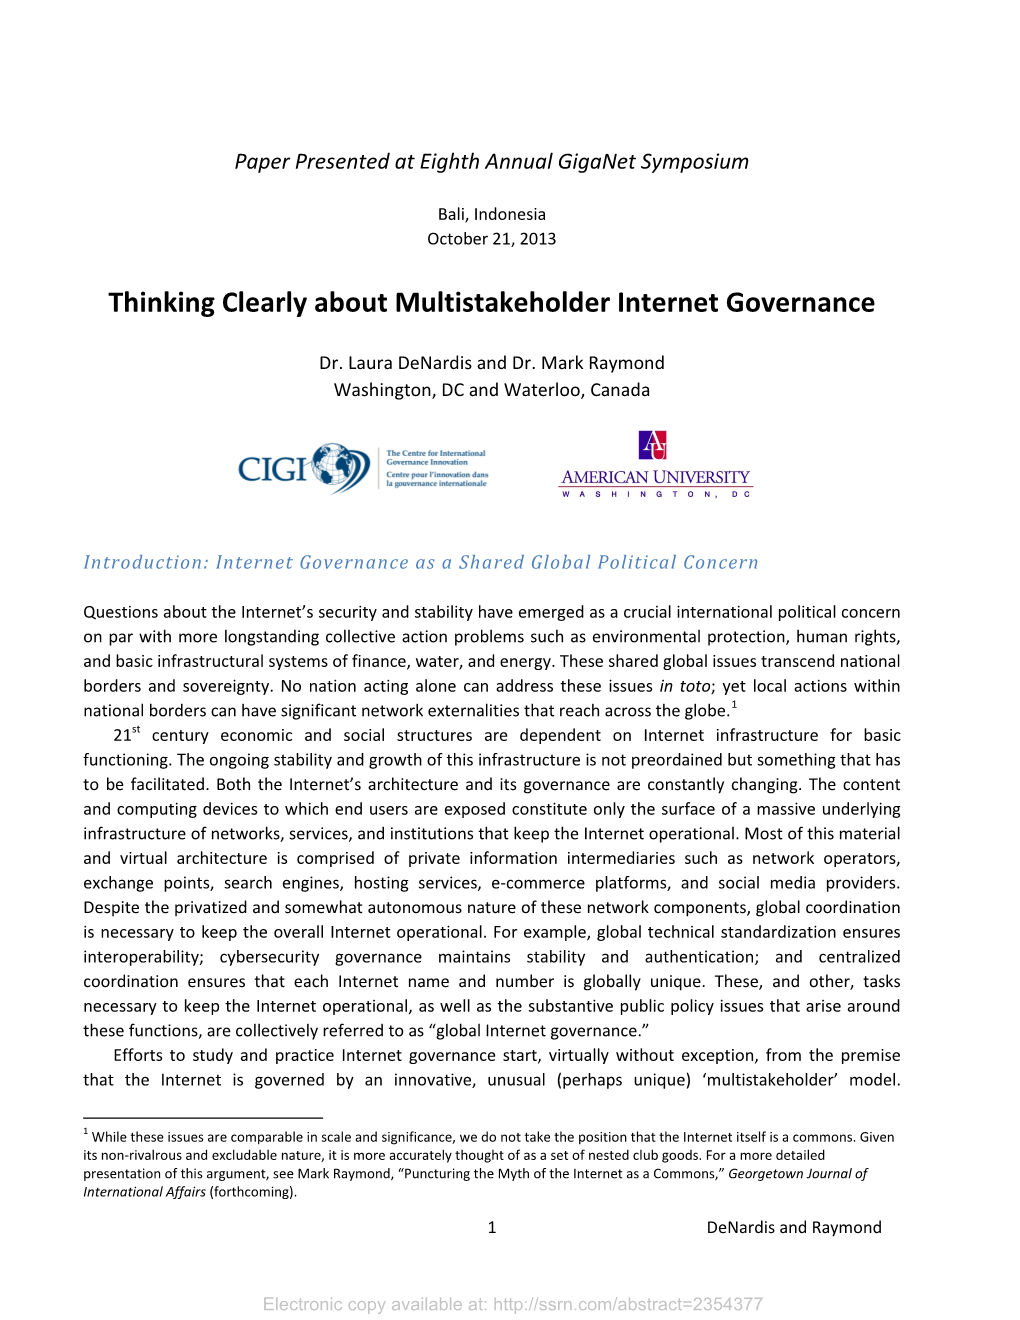 Thinking Clearly About Multistakeholder Internet Governance